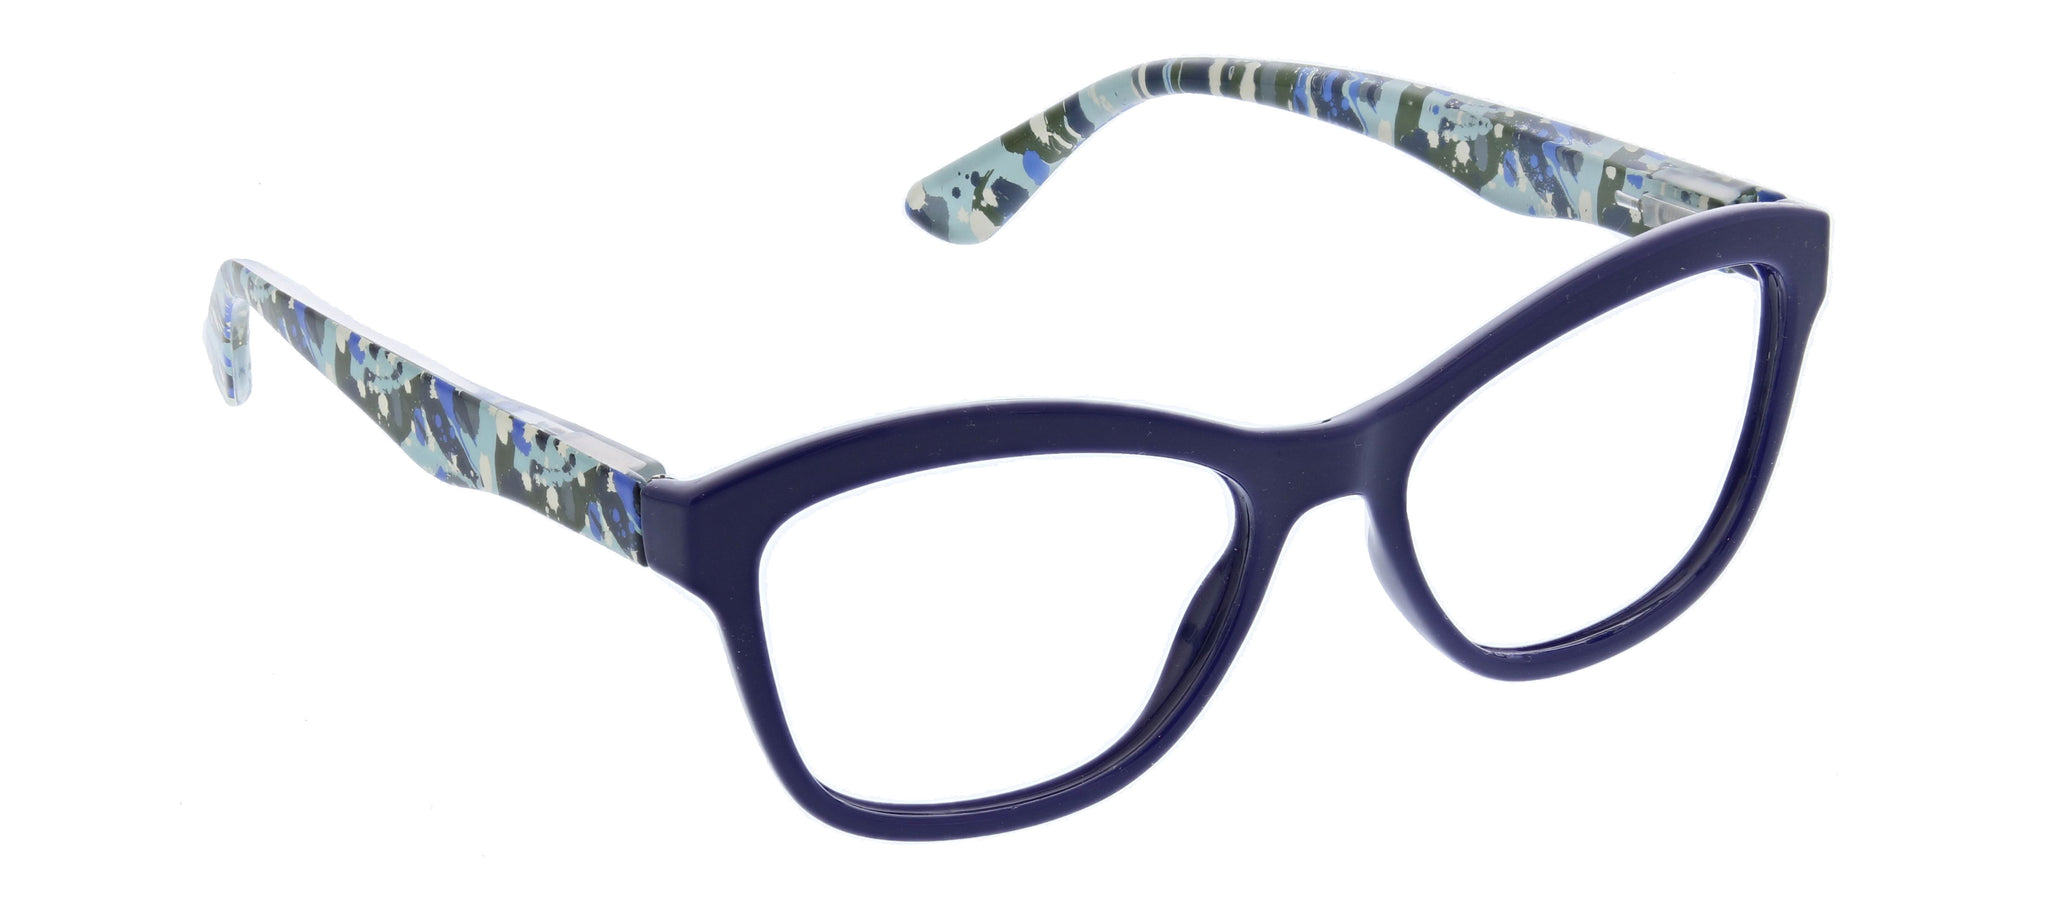 Brushwork blue light reading glasses in navy by Peepers